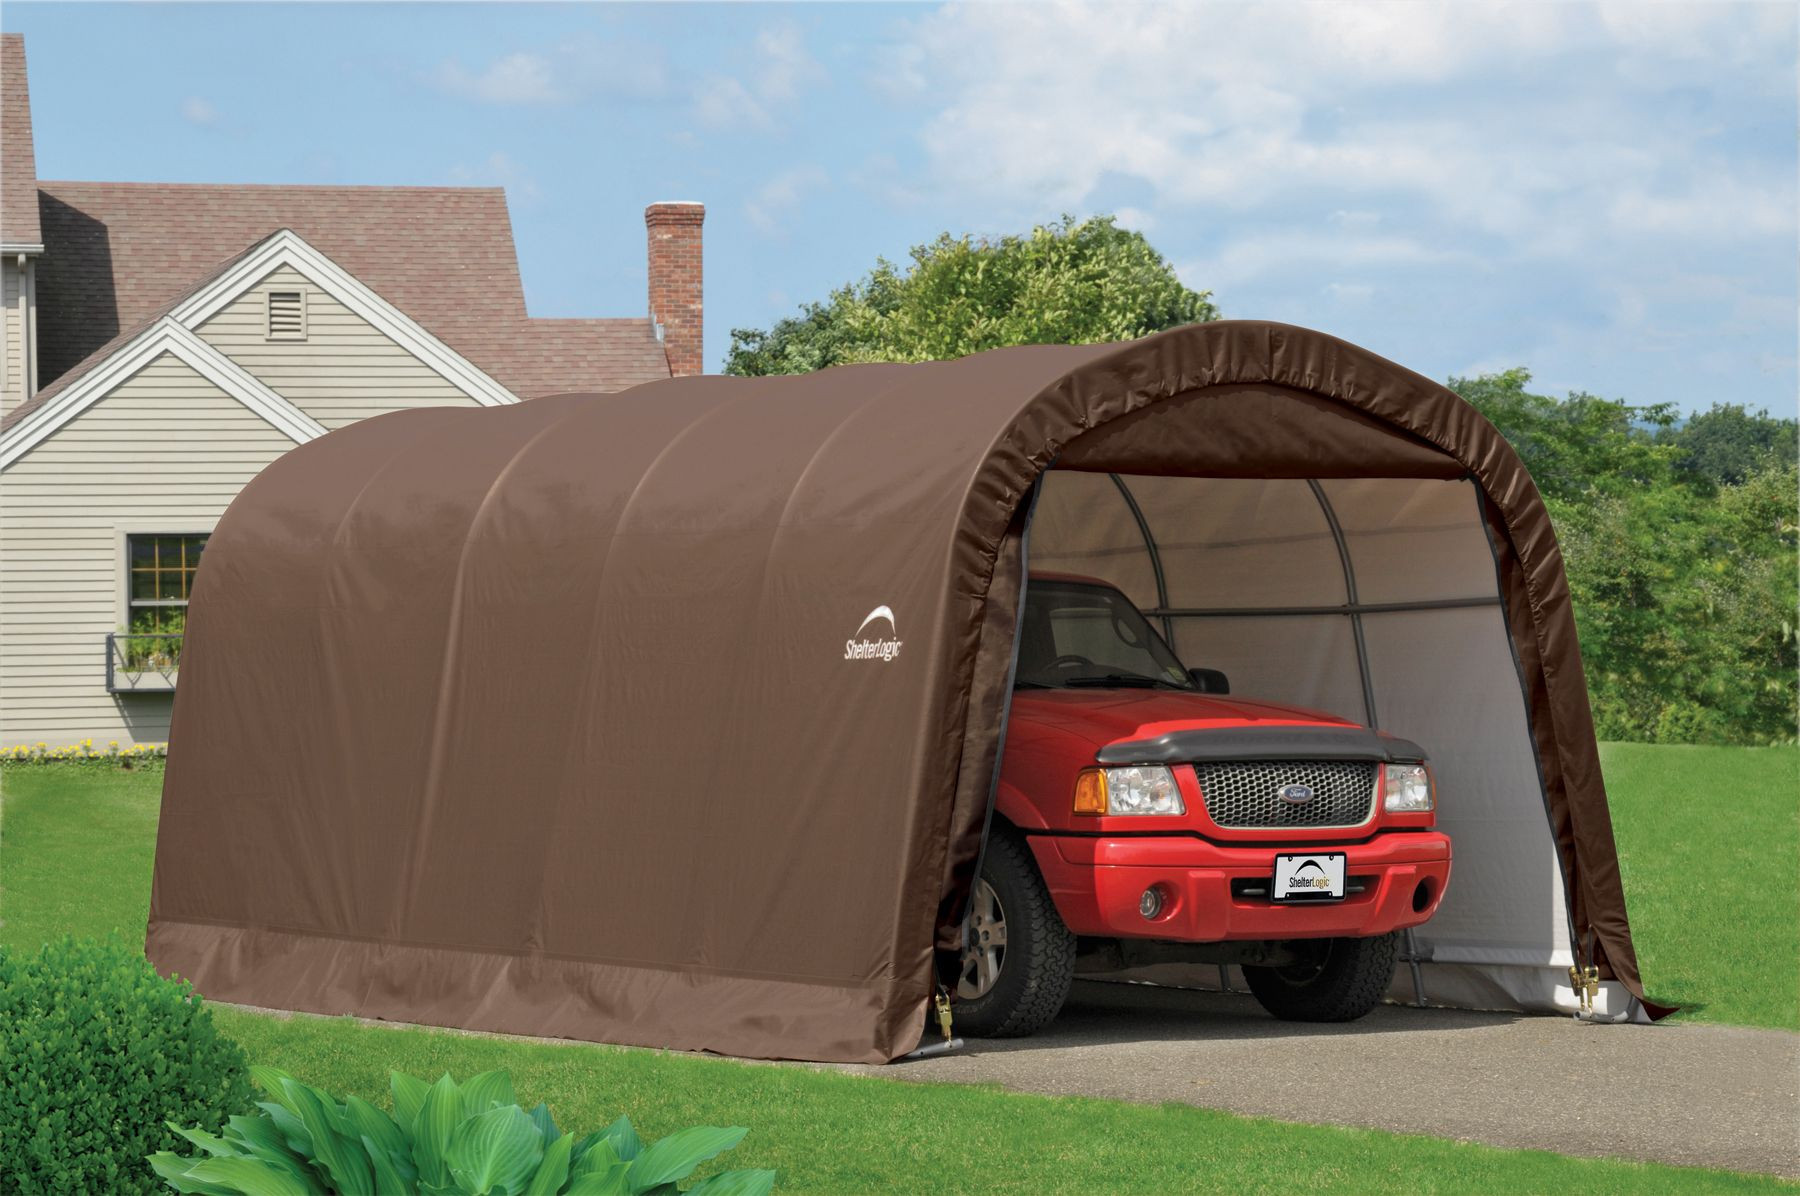 Thrifty Backyard Portable Buildings-Rent-2-Own
 Original Shelters